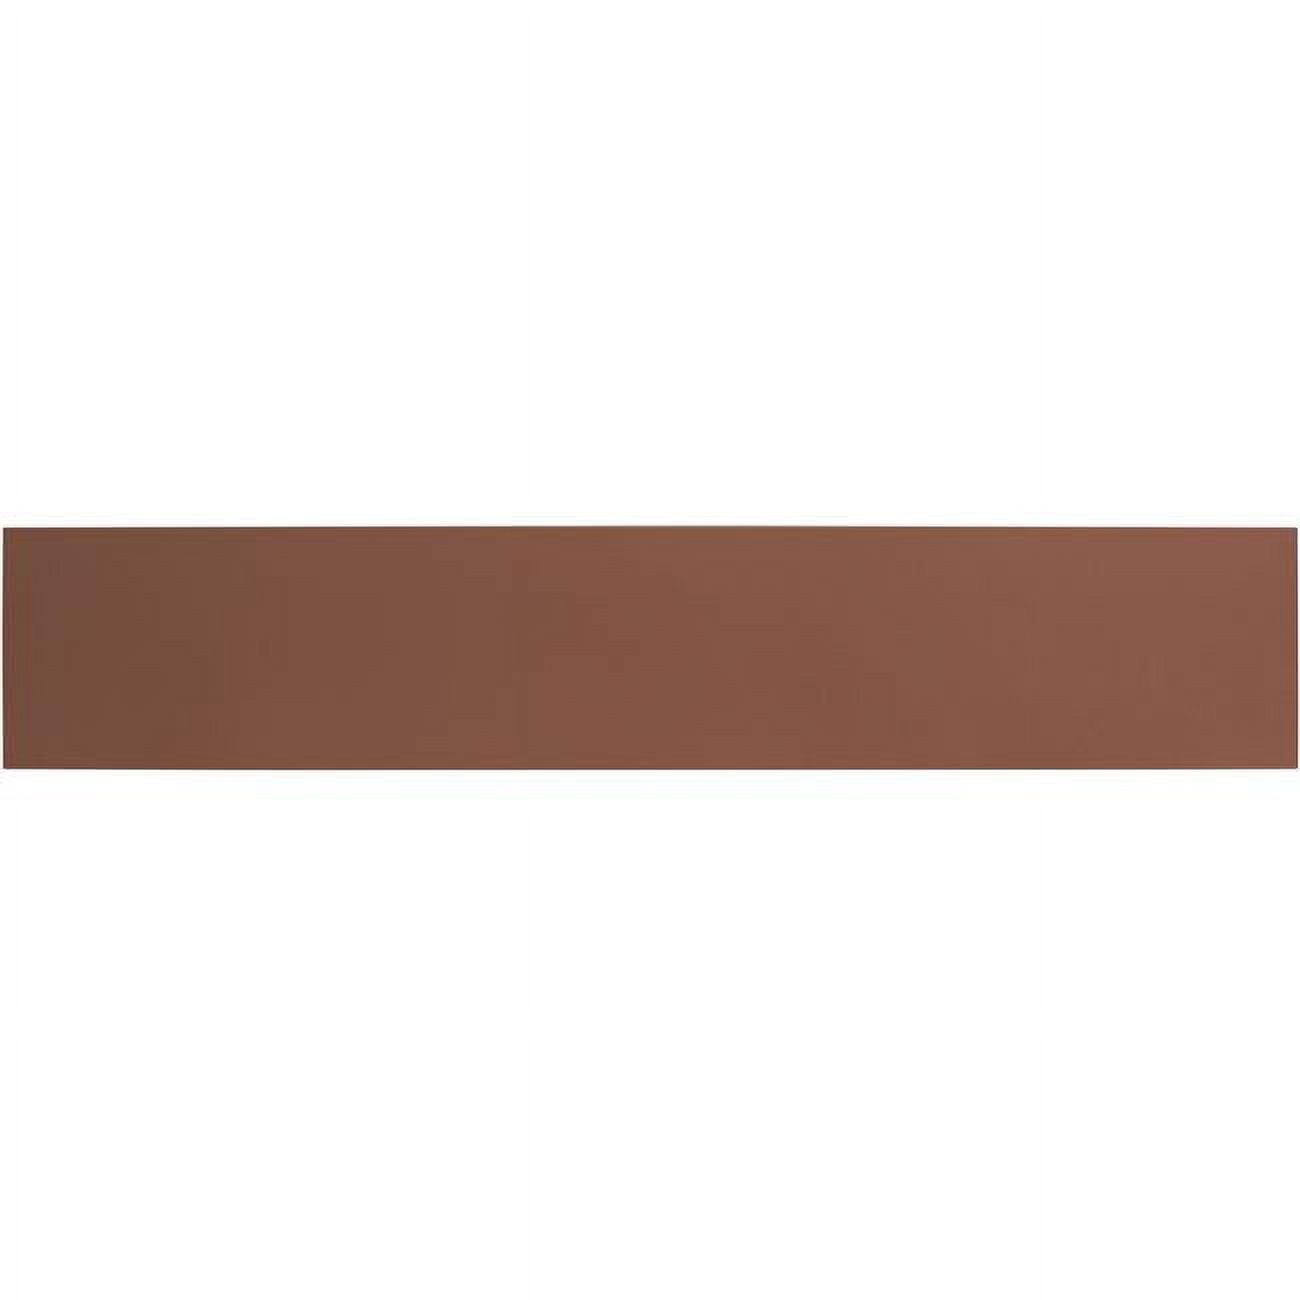 Picture of Brass Accents A09-P0628-COPKPADH 6 x 28 in. Adhesive Mount Kick Plate In Copper Metal Finish.